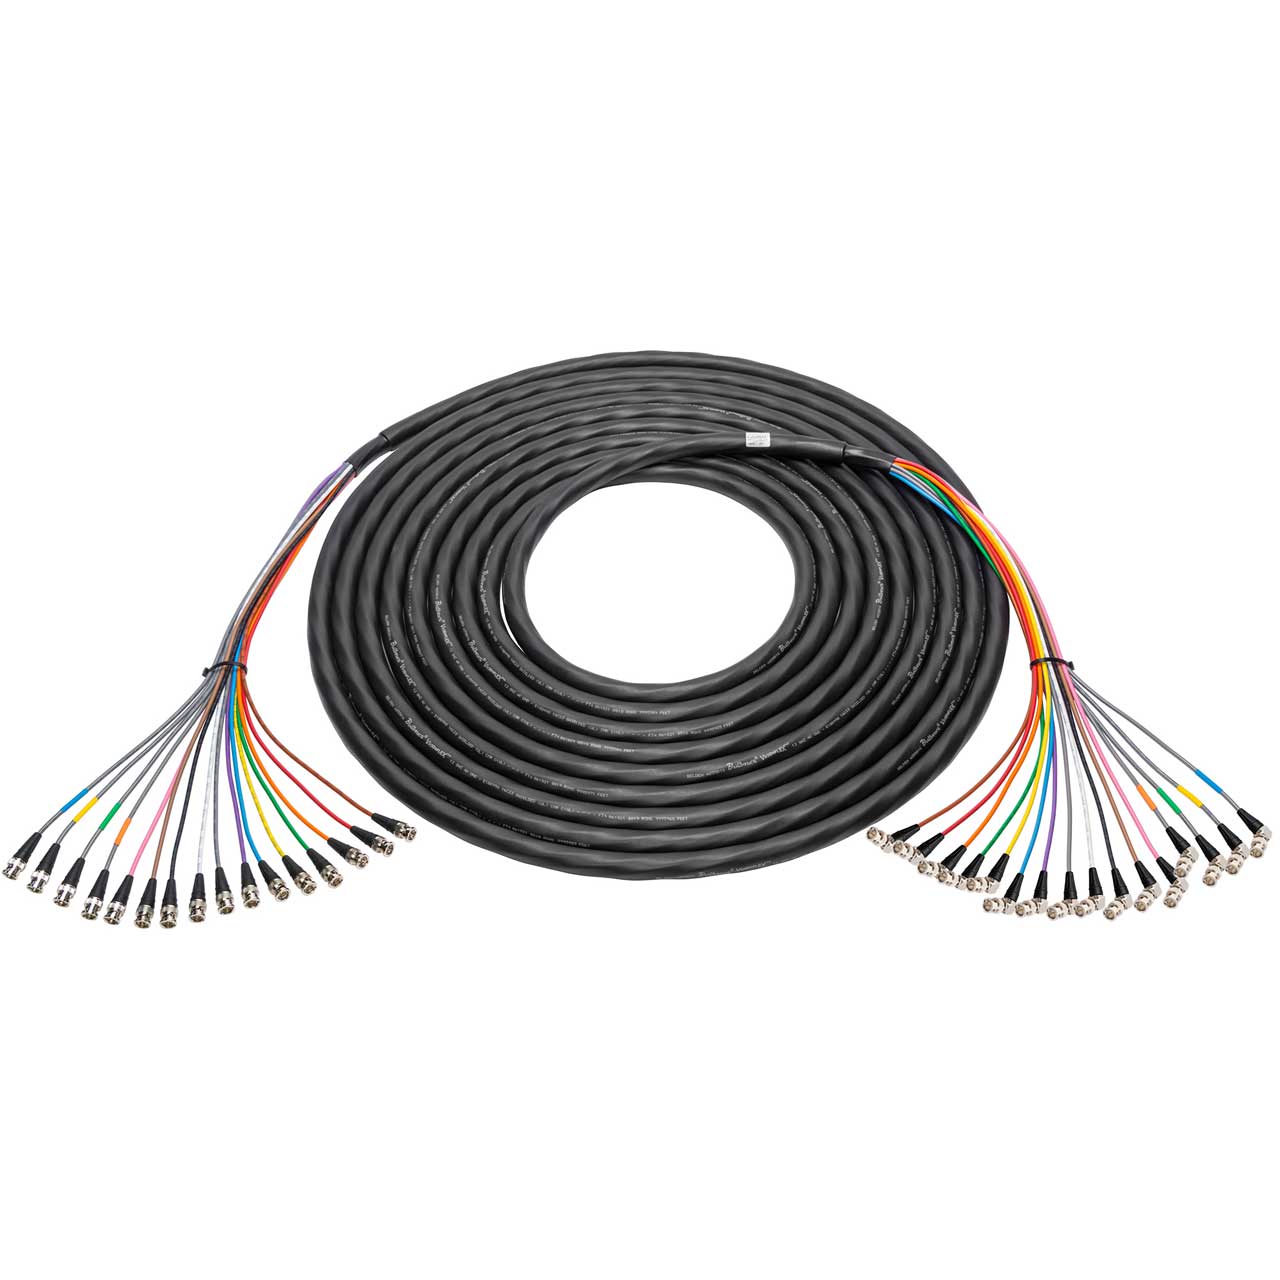 Laird 4855R16-BBA-003 16-Channel 12G-SDI/4K UHD BNC Male to Right Angle BNC Male Snake Cable - 3 Foot 4855R16-BBA-003